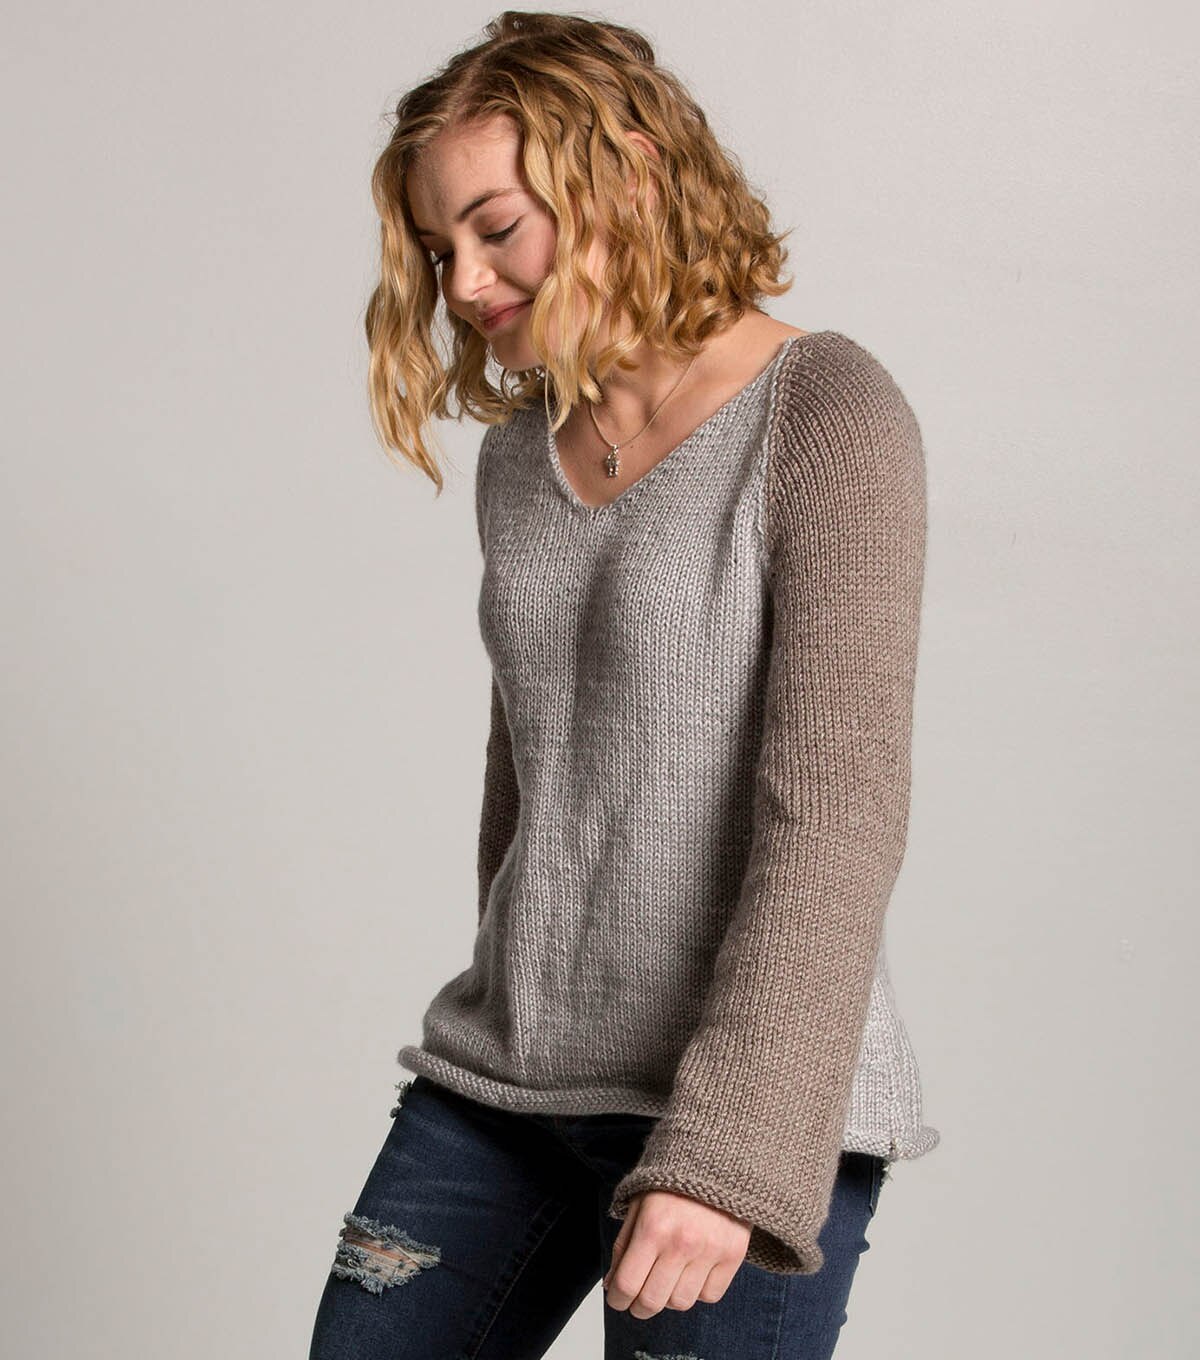 How To Make a Two Toned Bell Sleeve Sweater | JOANN